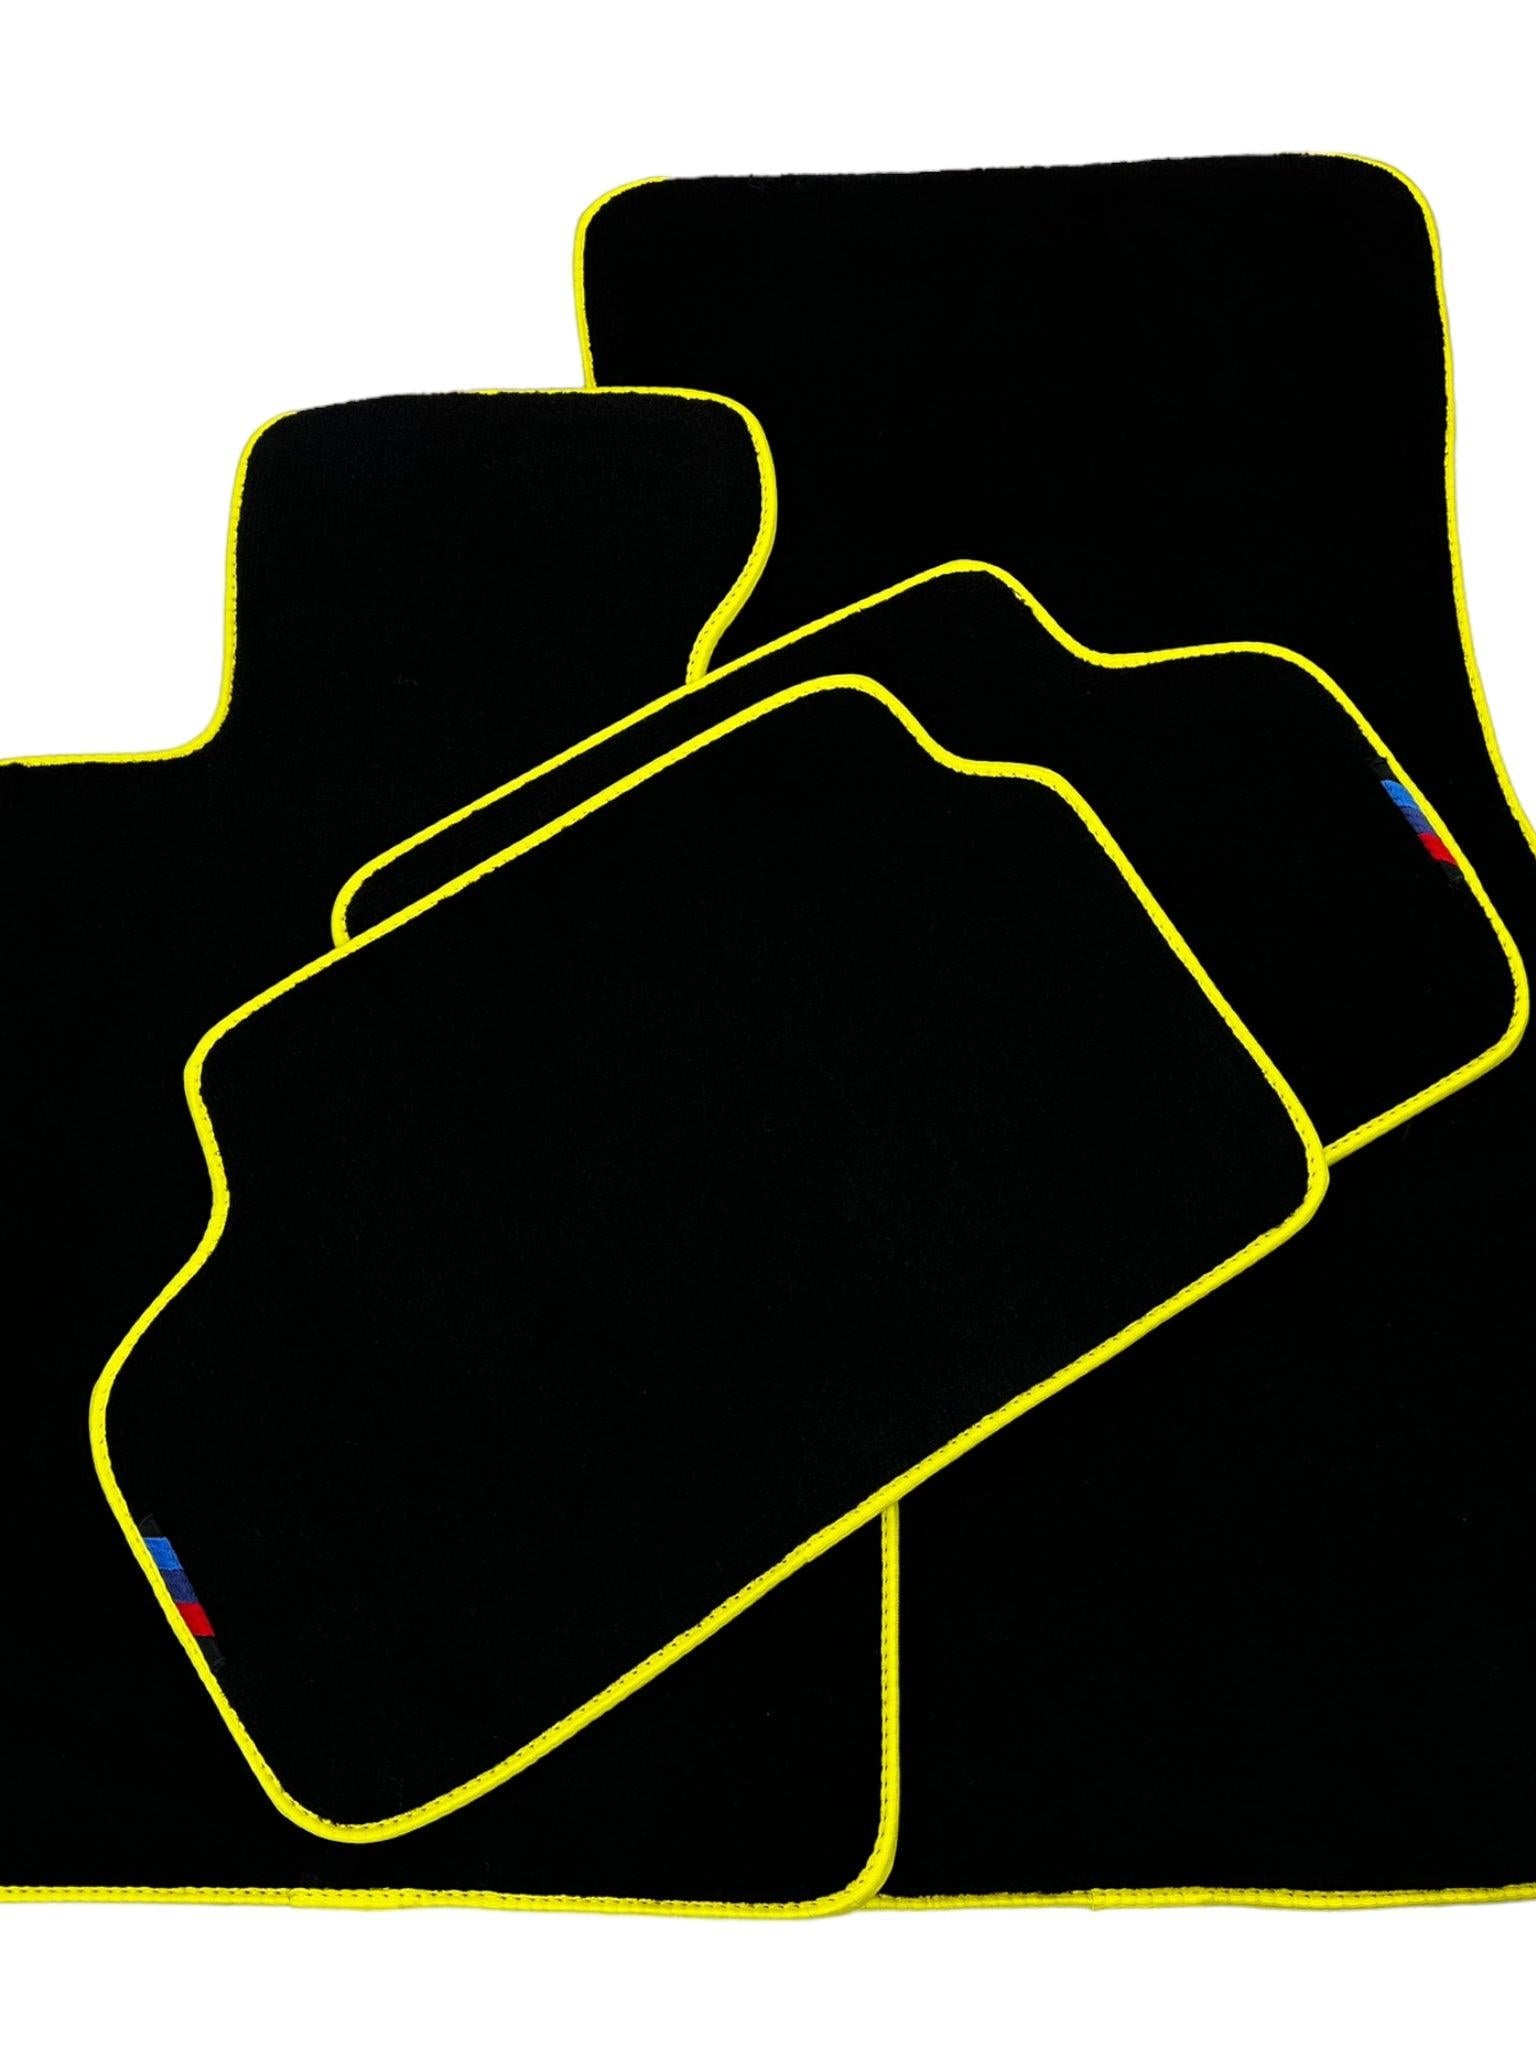 Black Floor Mats For BMW X6 Series F16 | Fighter Jet Edition | Yellow Trim